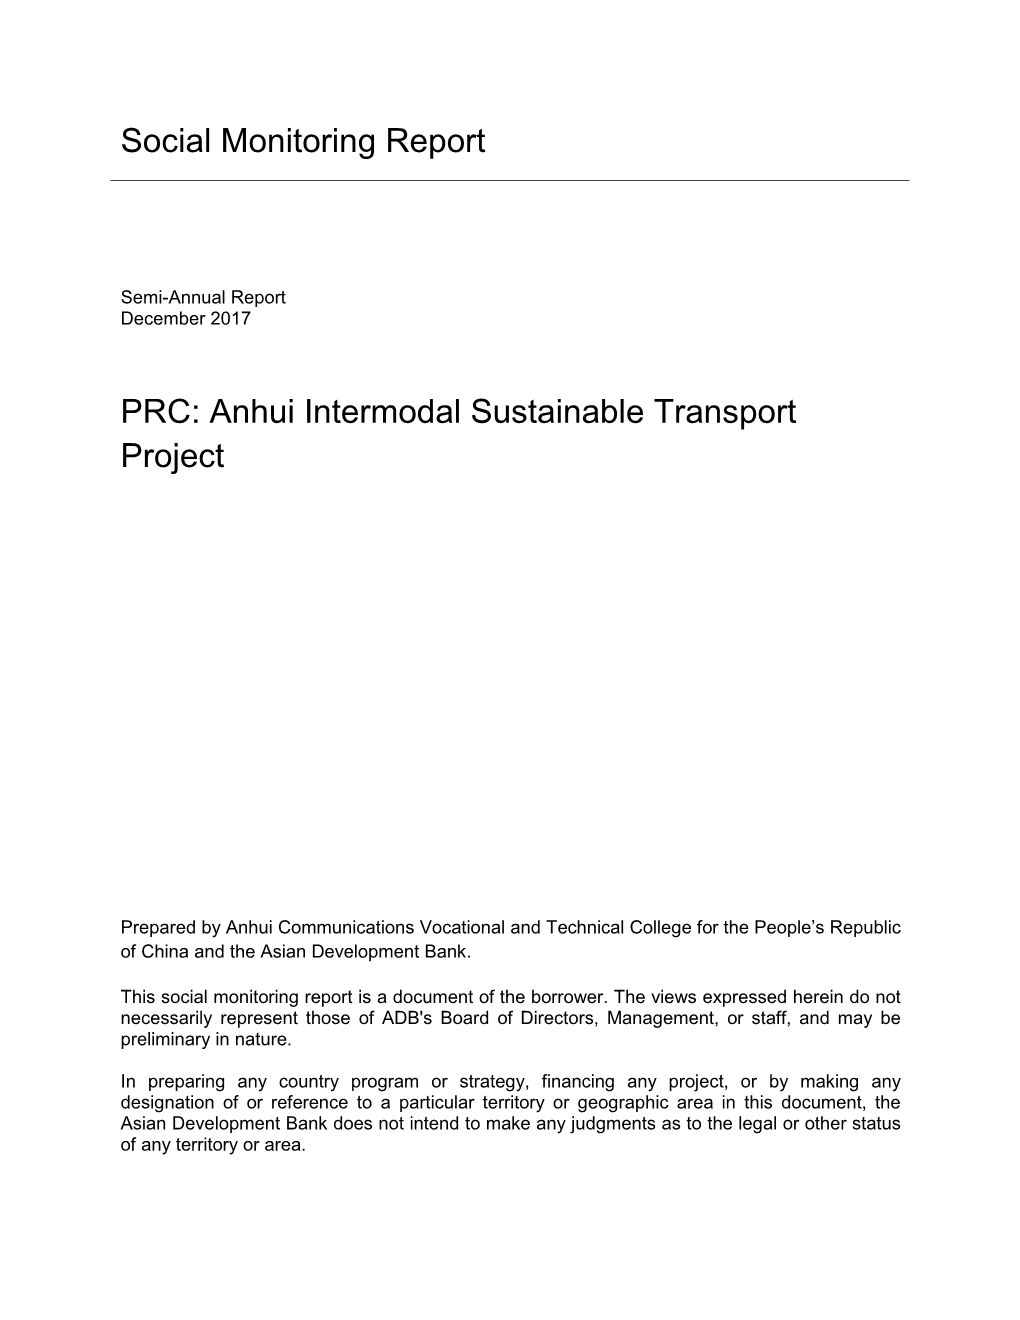 45021-002: Anhui Intermodal Sustainable Transport Project